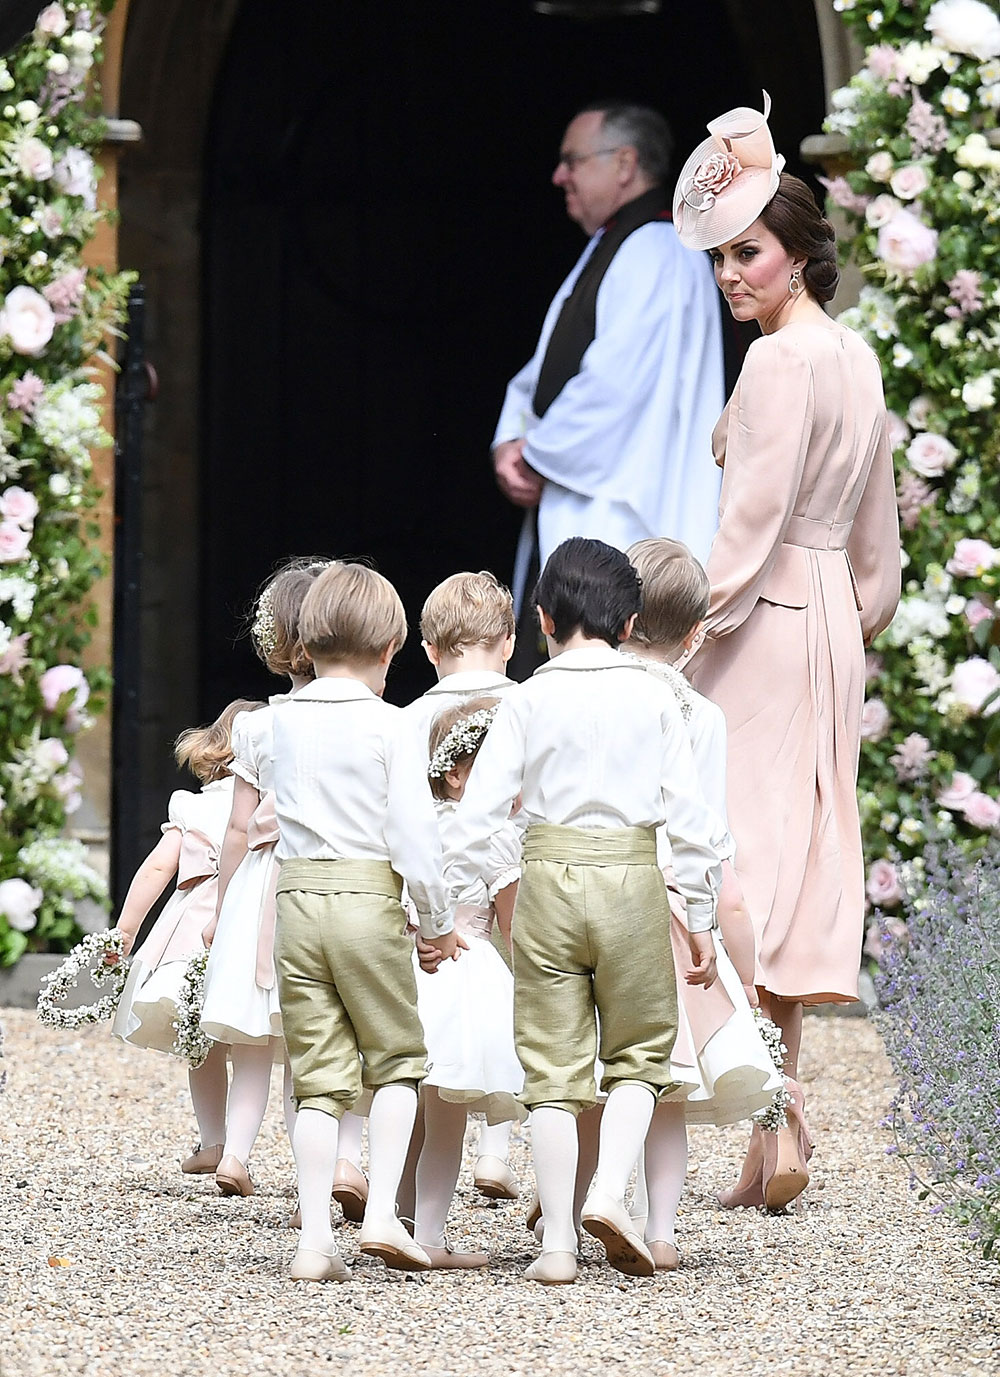 The Duchess of Cambridge leads the flower girls and page boys, including her own children Prince George and Princess Charlotte, into the church.